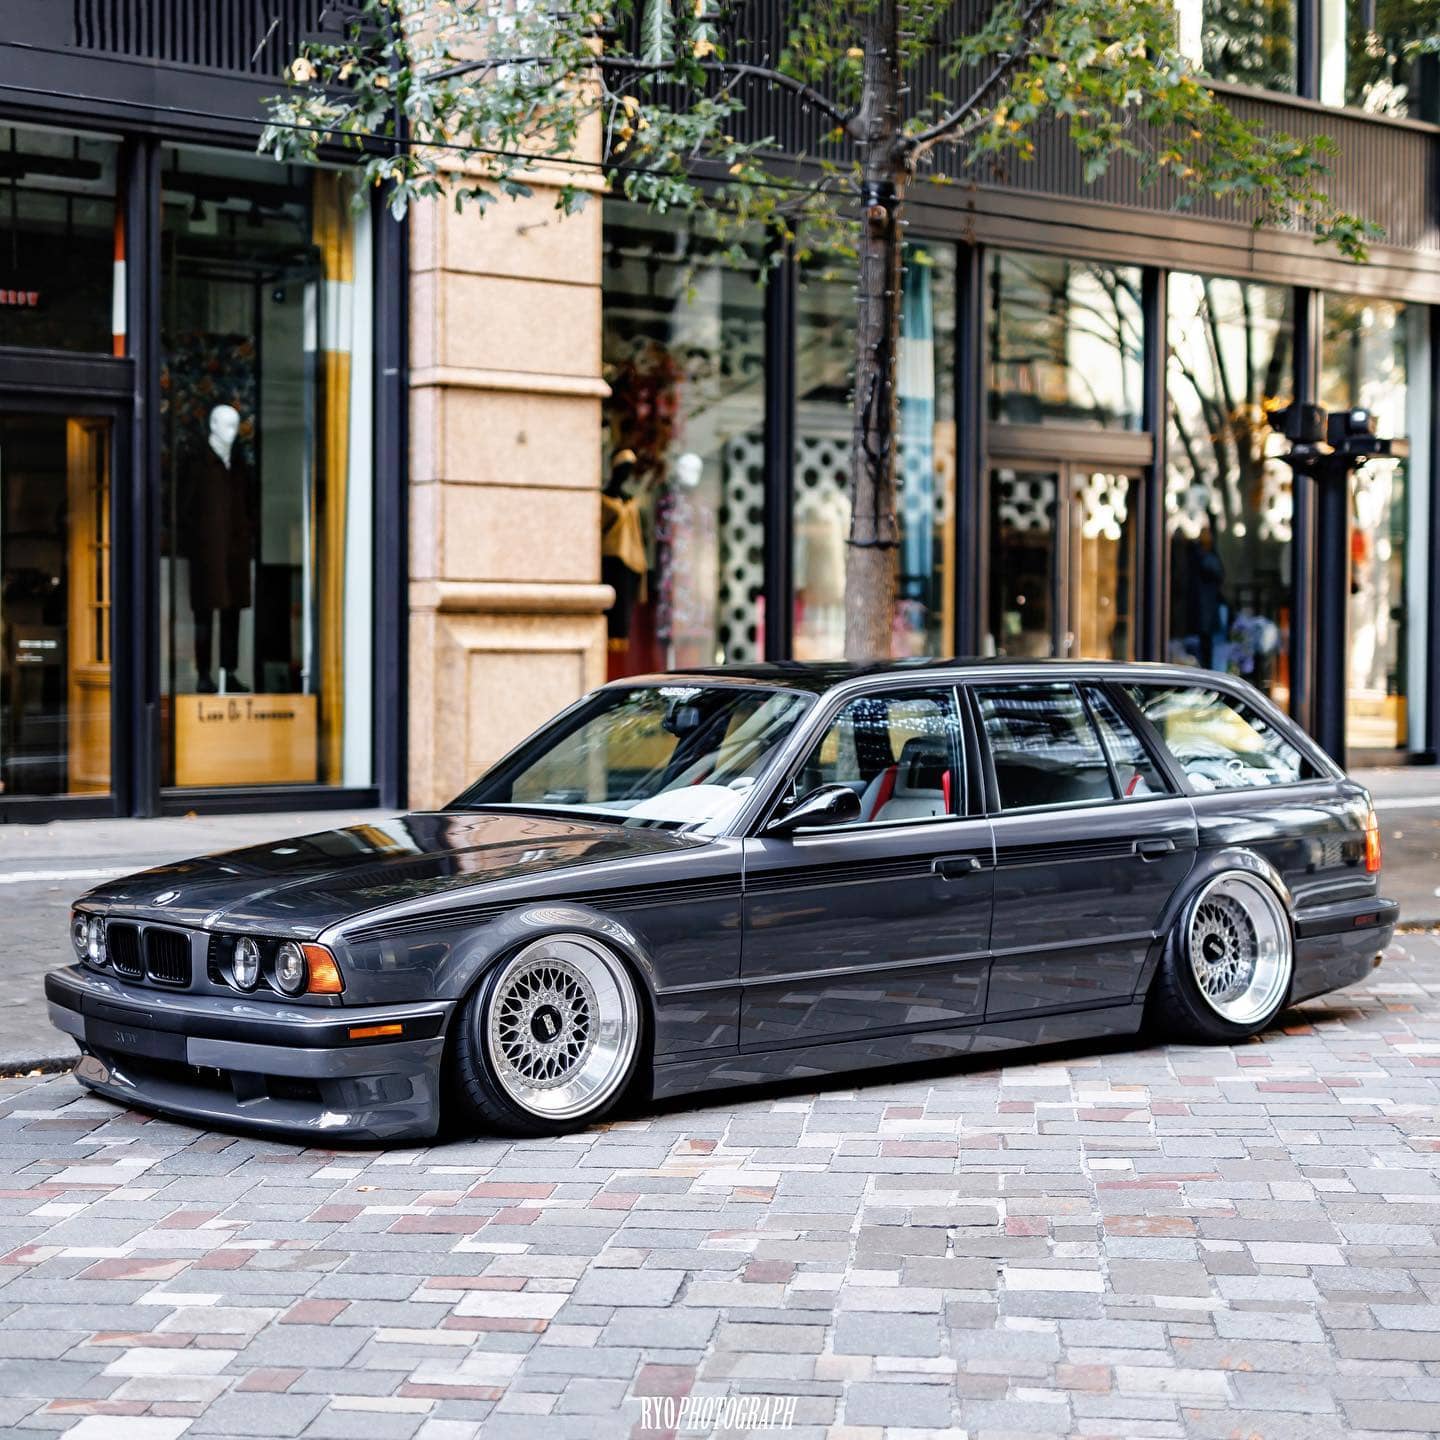 Bagged BMW E34 Touring on 18" BBS RS rims